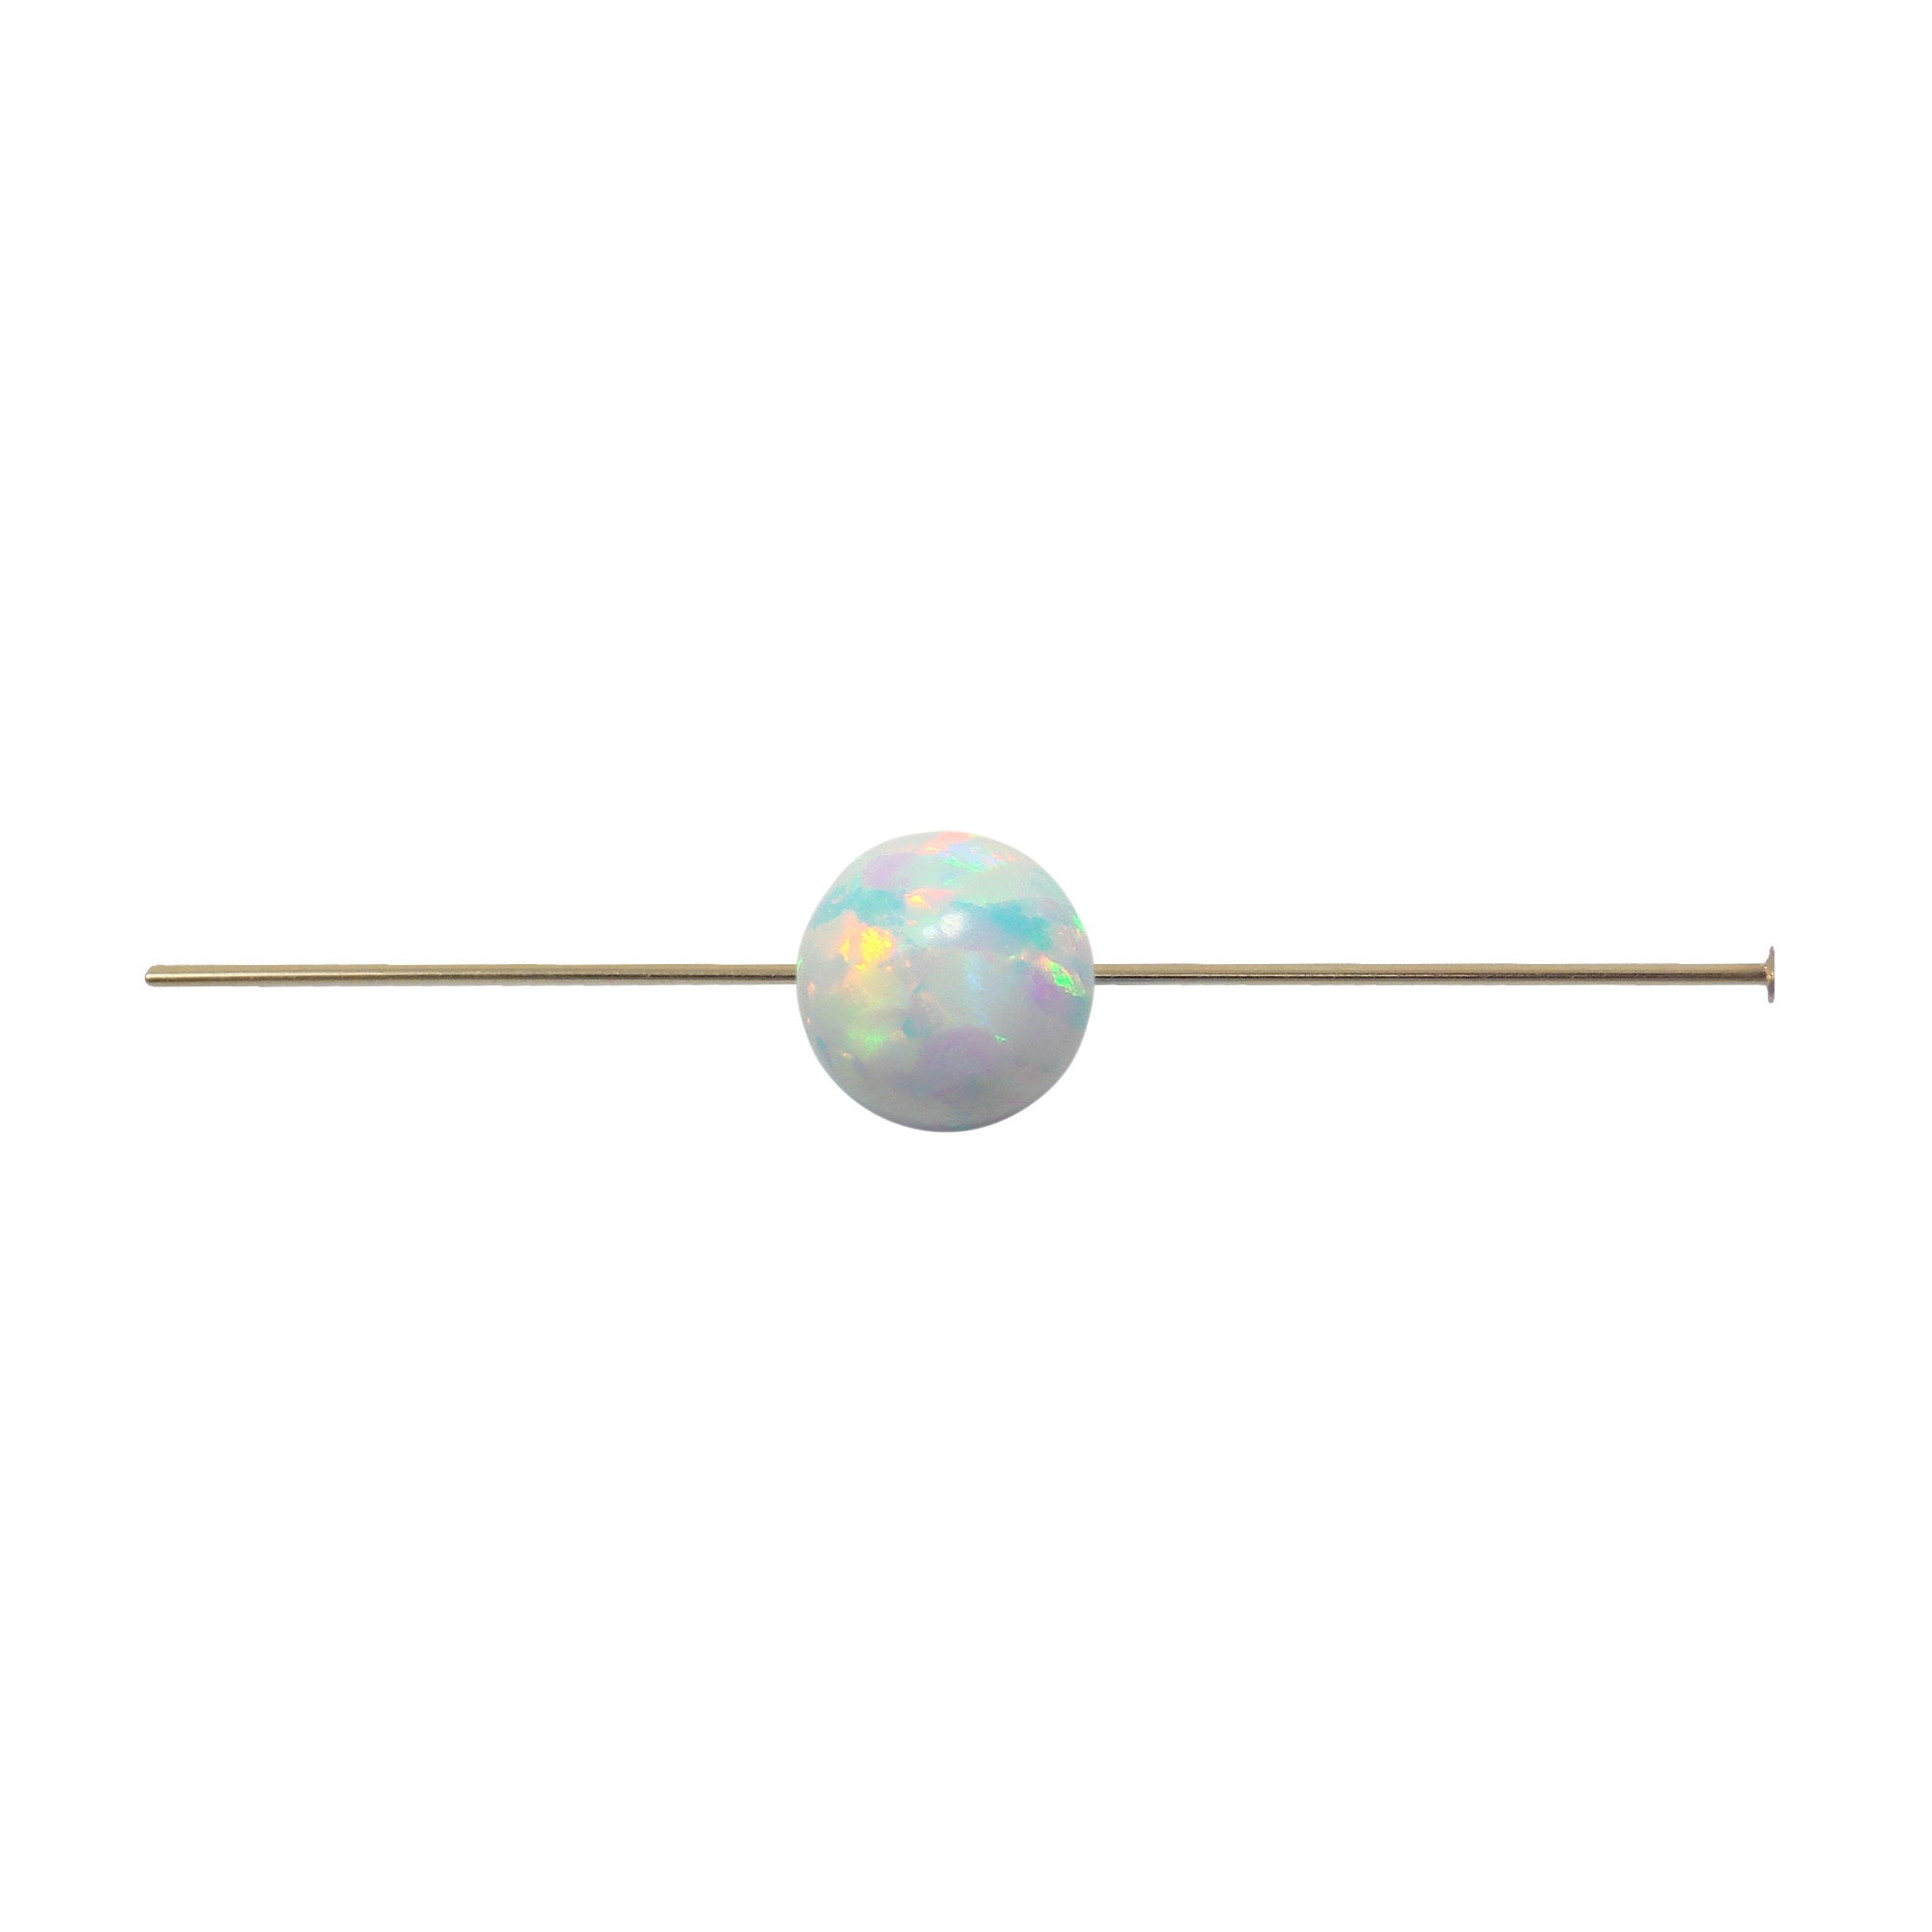 White Opal Bead. Authentic Lab-created Opal Round Beads 4mm.